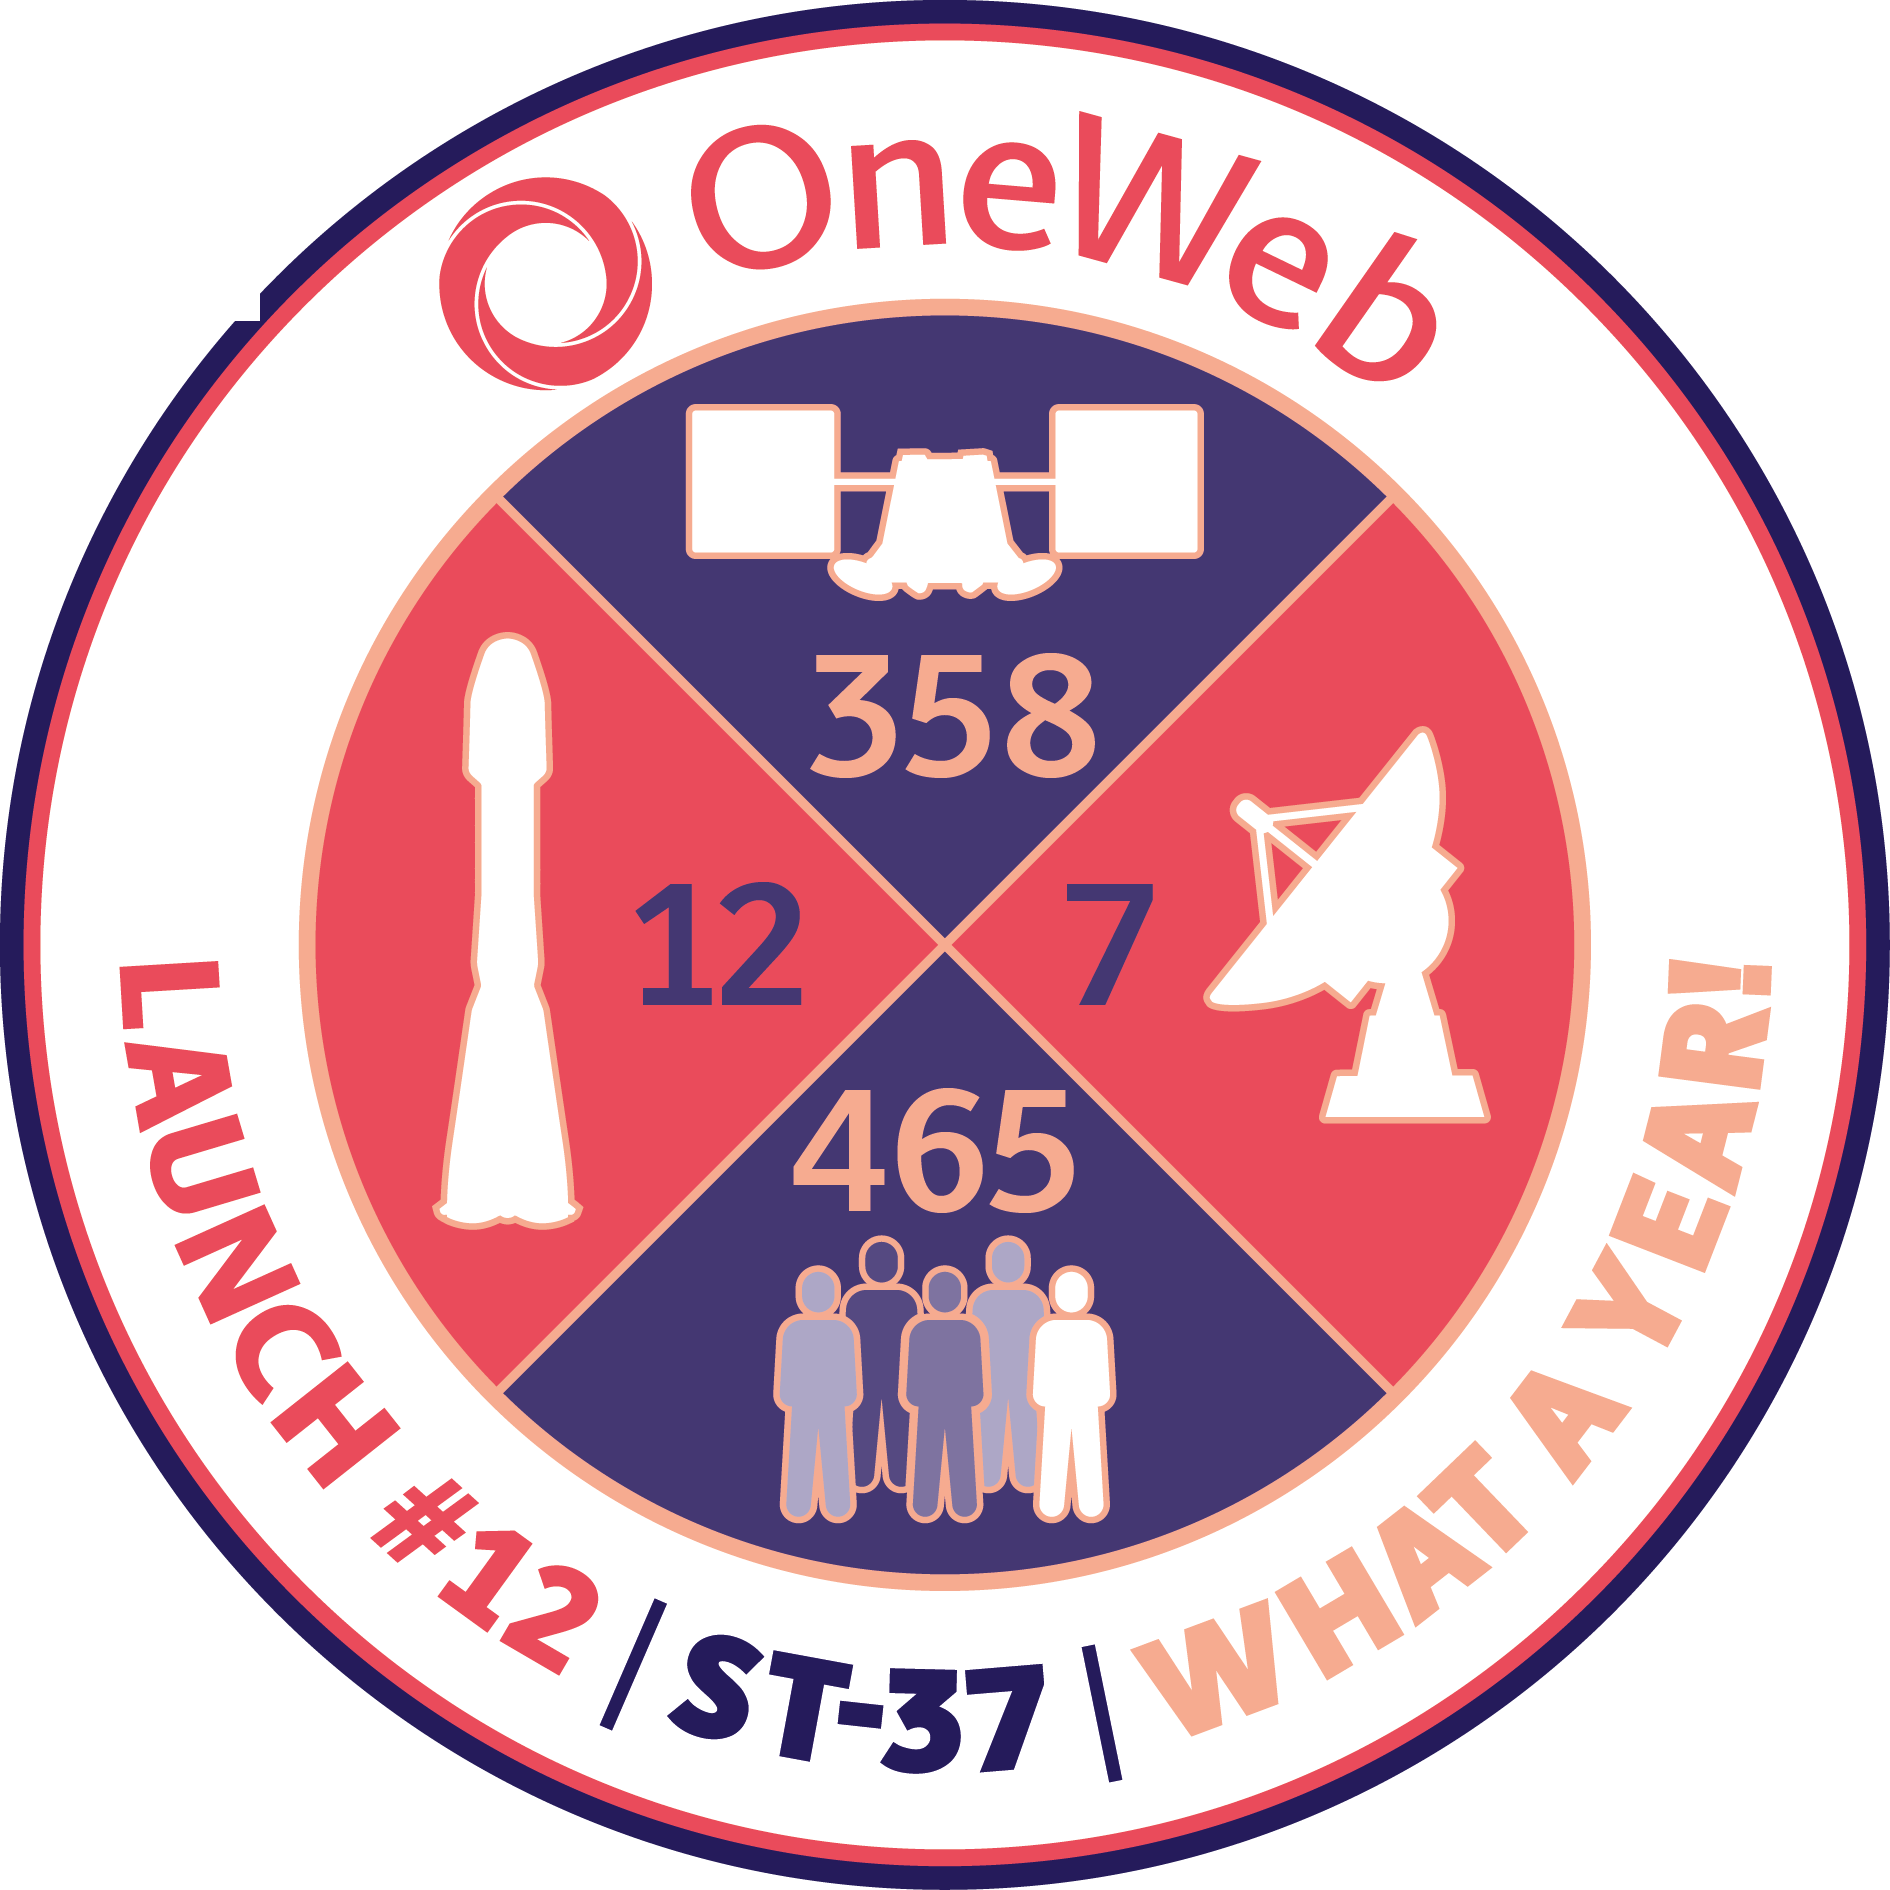 Mission patch for OneWeb 12